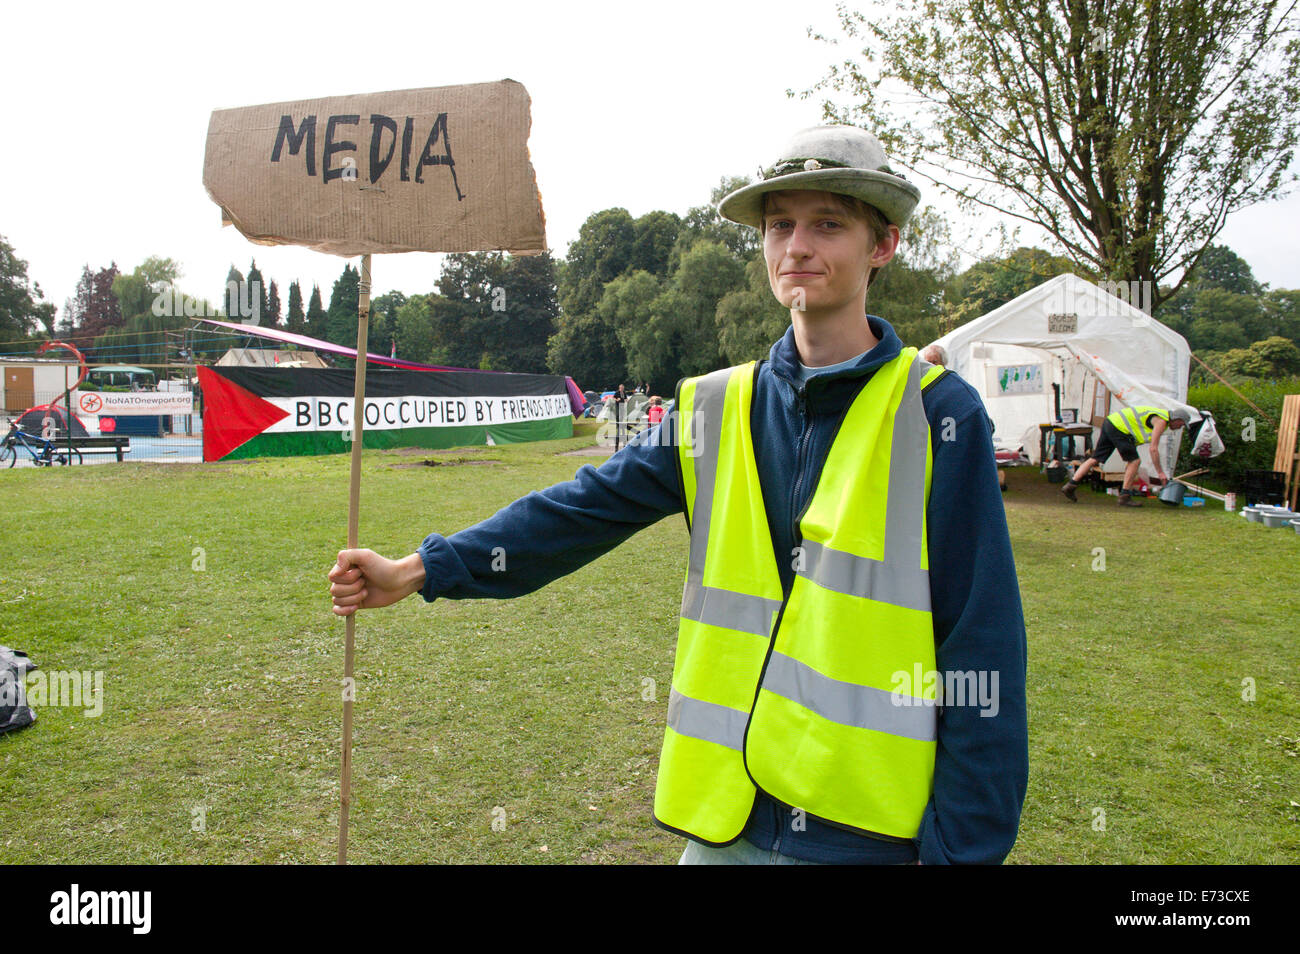 Newport, Gwent,  UK. 5th September 2014. Alasdair Ibbotson 19 President of CND Group at Stirling University, chaperones the media around the camp. Strict rules for photography are in place. Credit:  Graham M. Lawrence/Alamy Live News. Stock Photo